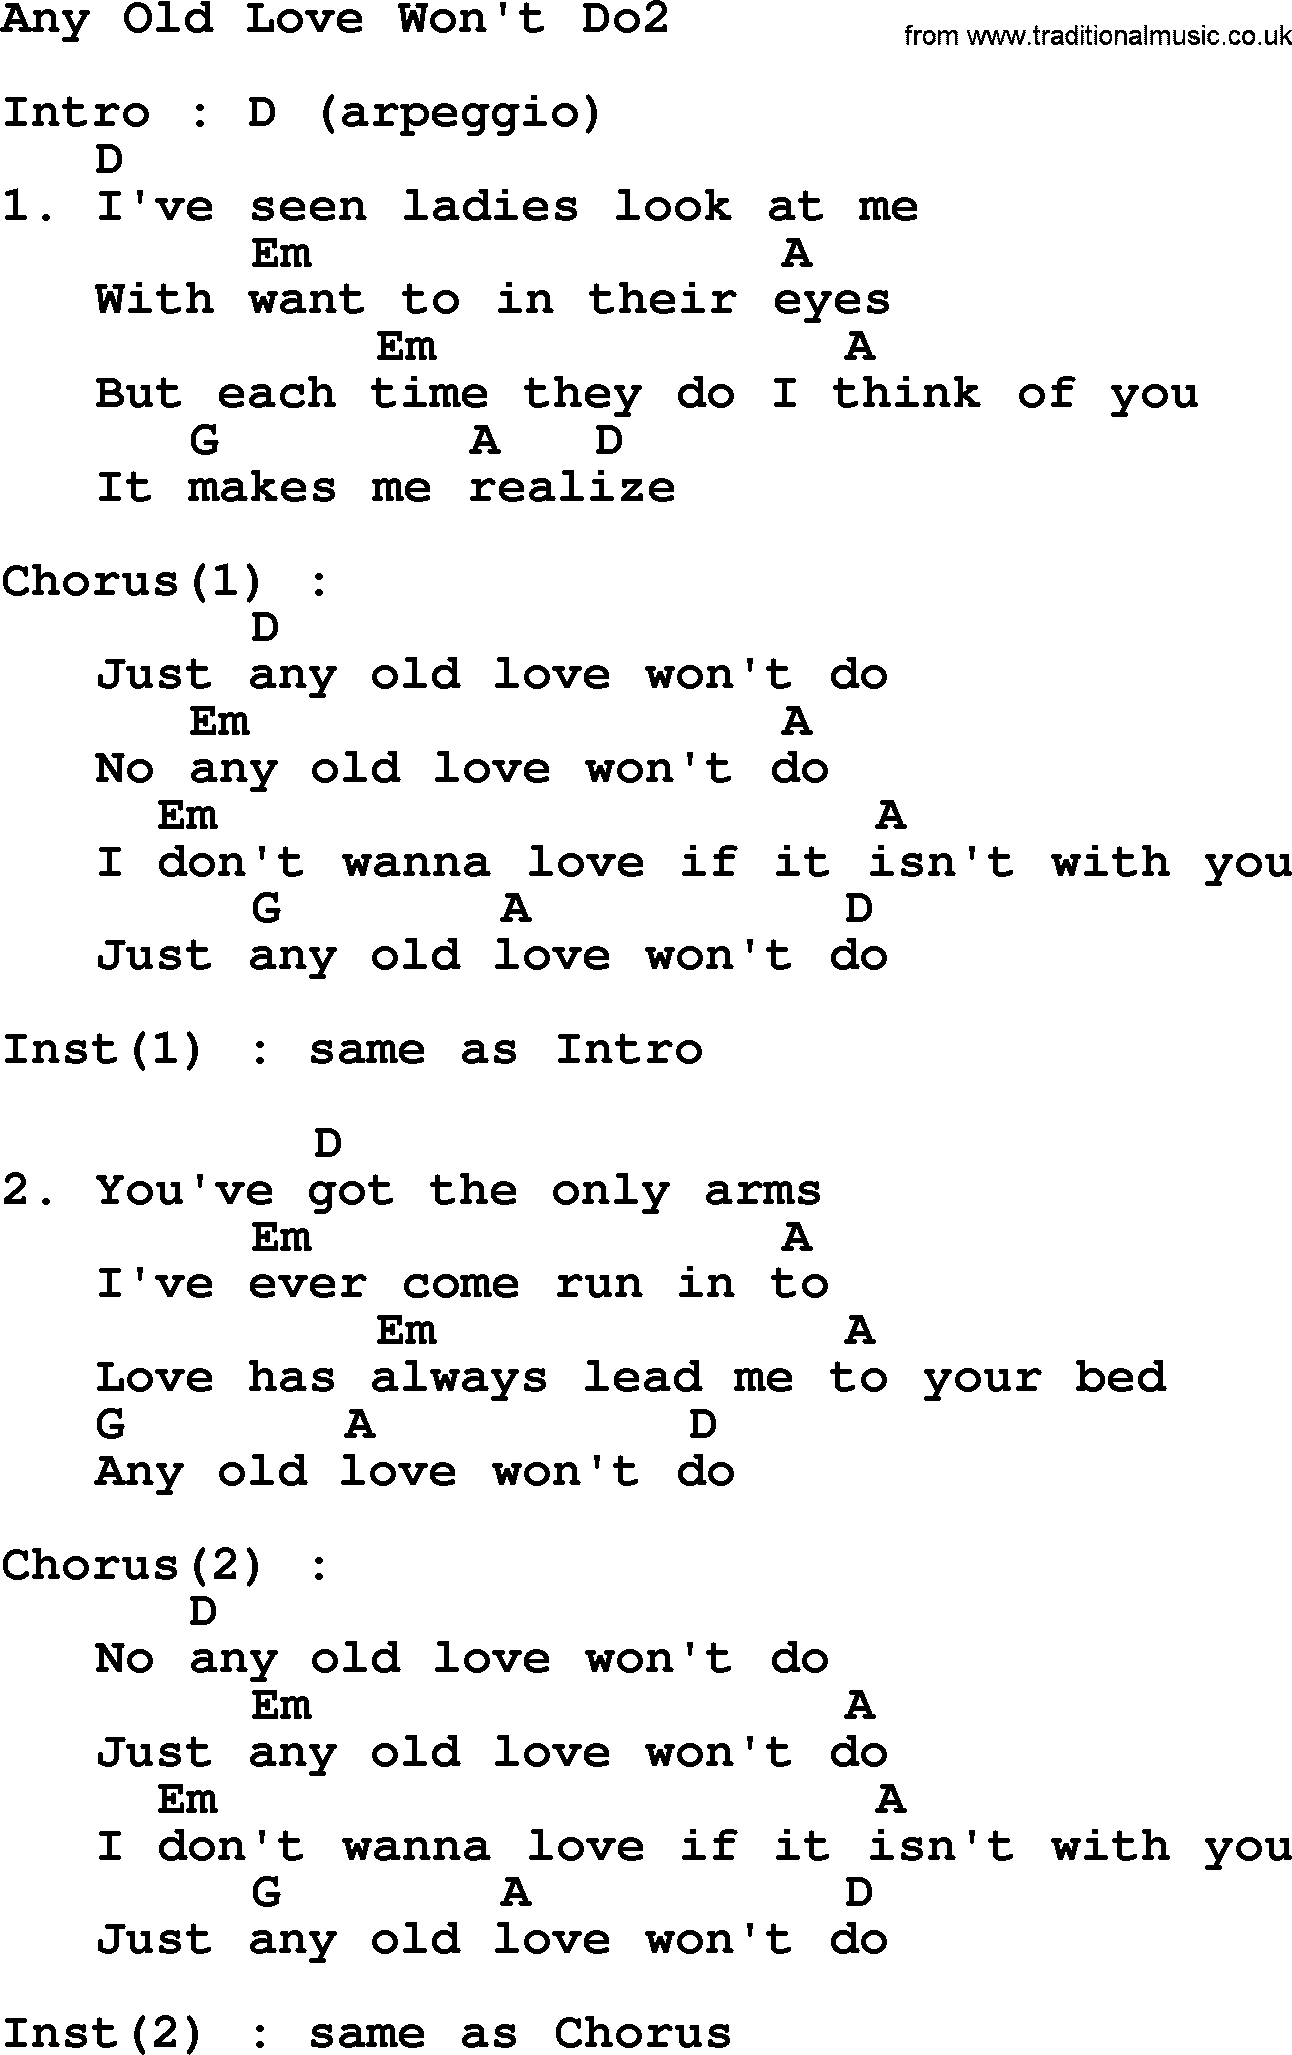 George Strait song: Any Old Love Won't Do2, lyrics and chords